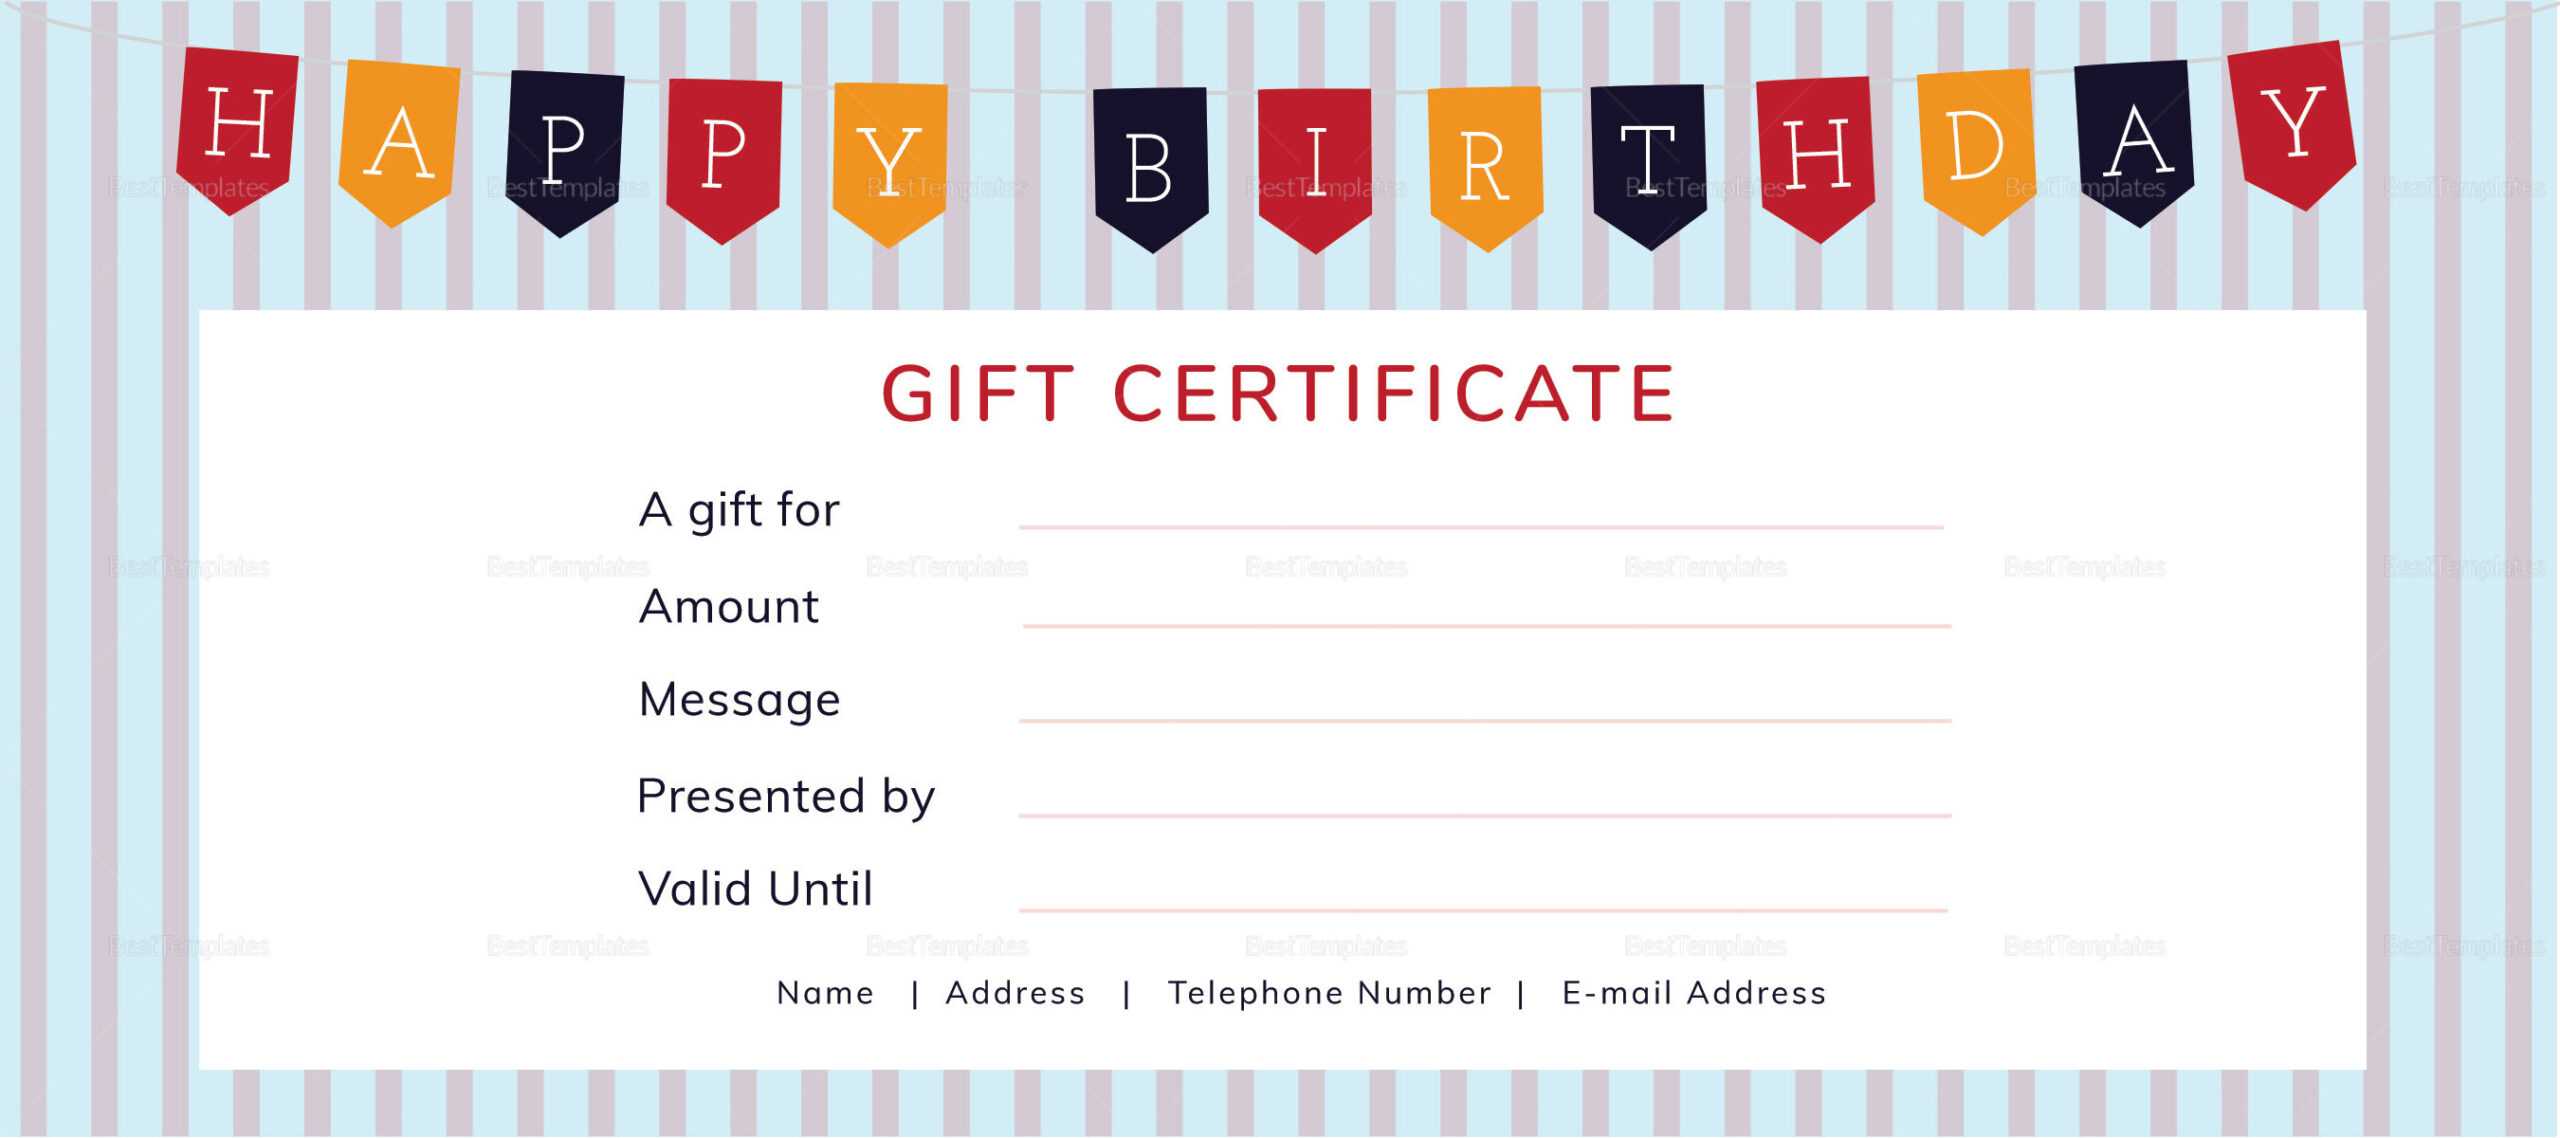 Happy Birthday Gift Certificate Template Throughout Indesign Gift Certificate Template